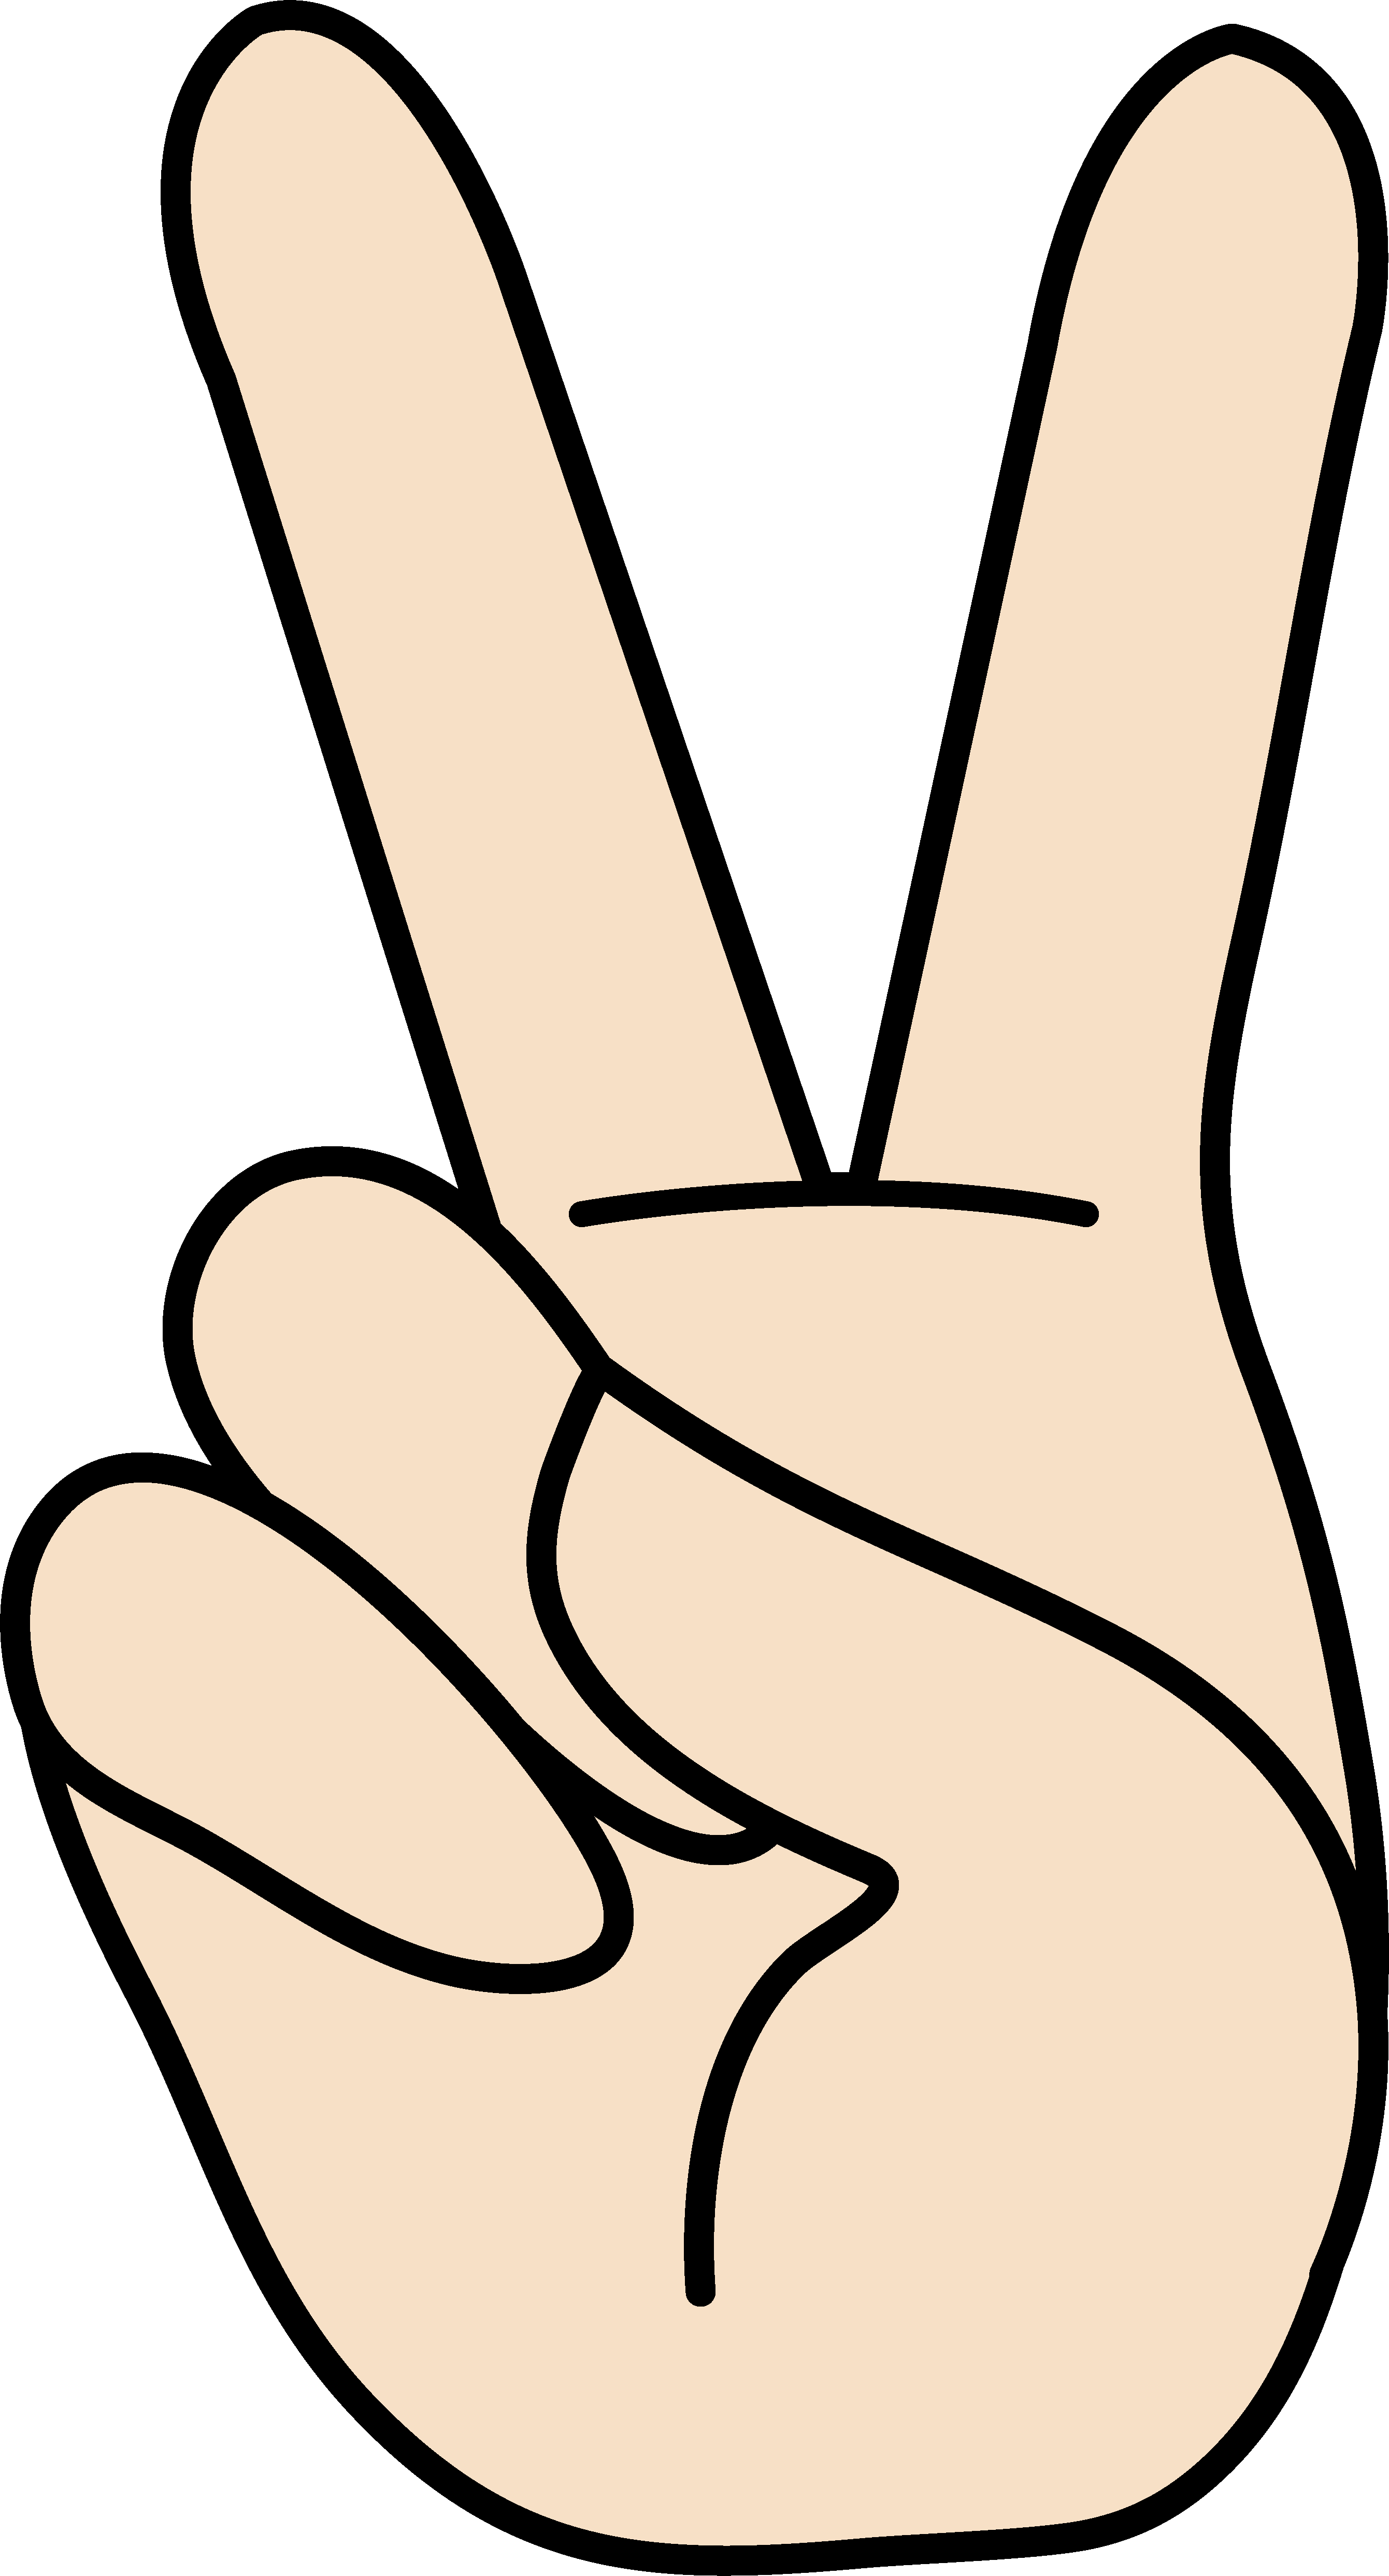 Peace hand sign free. Clipart hands signing